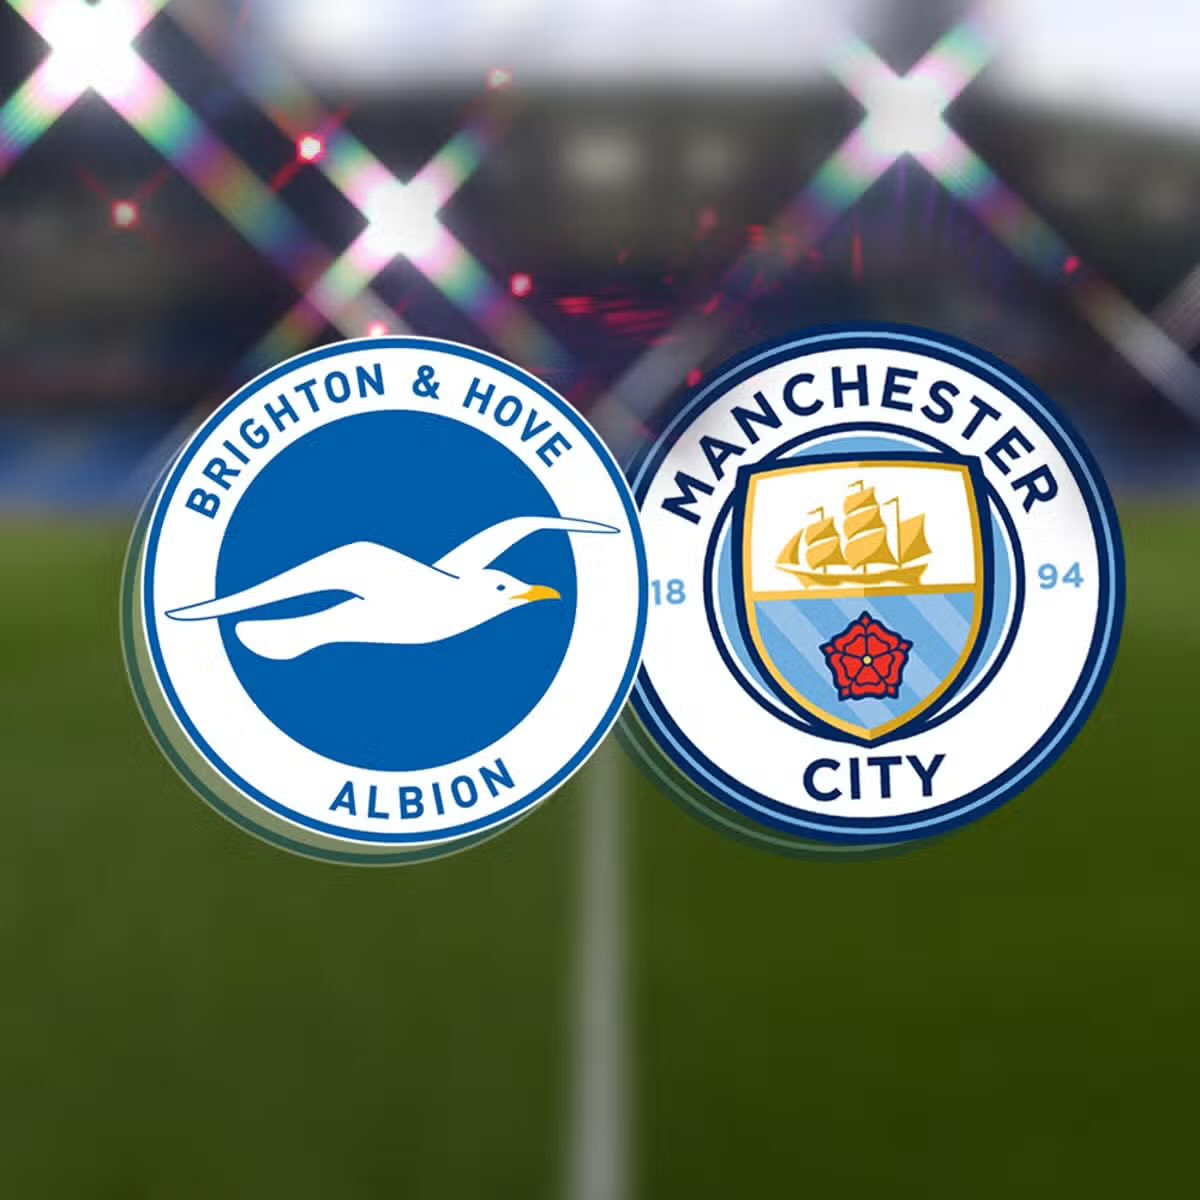 English Premier League 4/25:

⚽️Manchester City @ Brighton⚽️

Parlay:
🚨Manchester City ML & Over 1.5 Total Goals🚨

#PremierLeague #EPL #ManchesterCity #ManCity #Brighton #Sports #sportsbets #betting #prizepicks #underdog